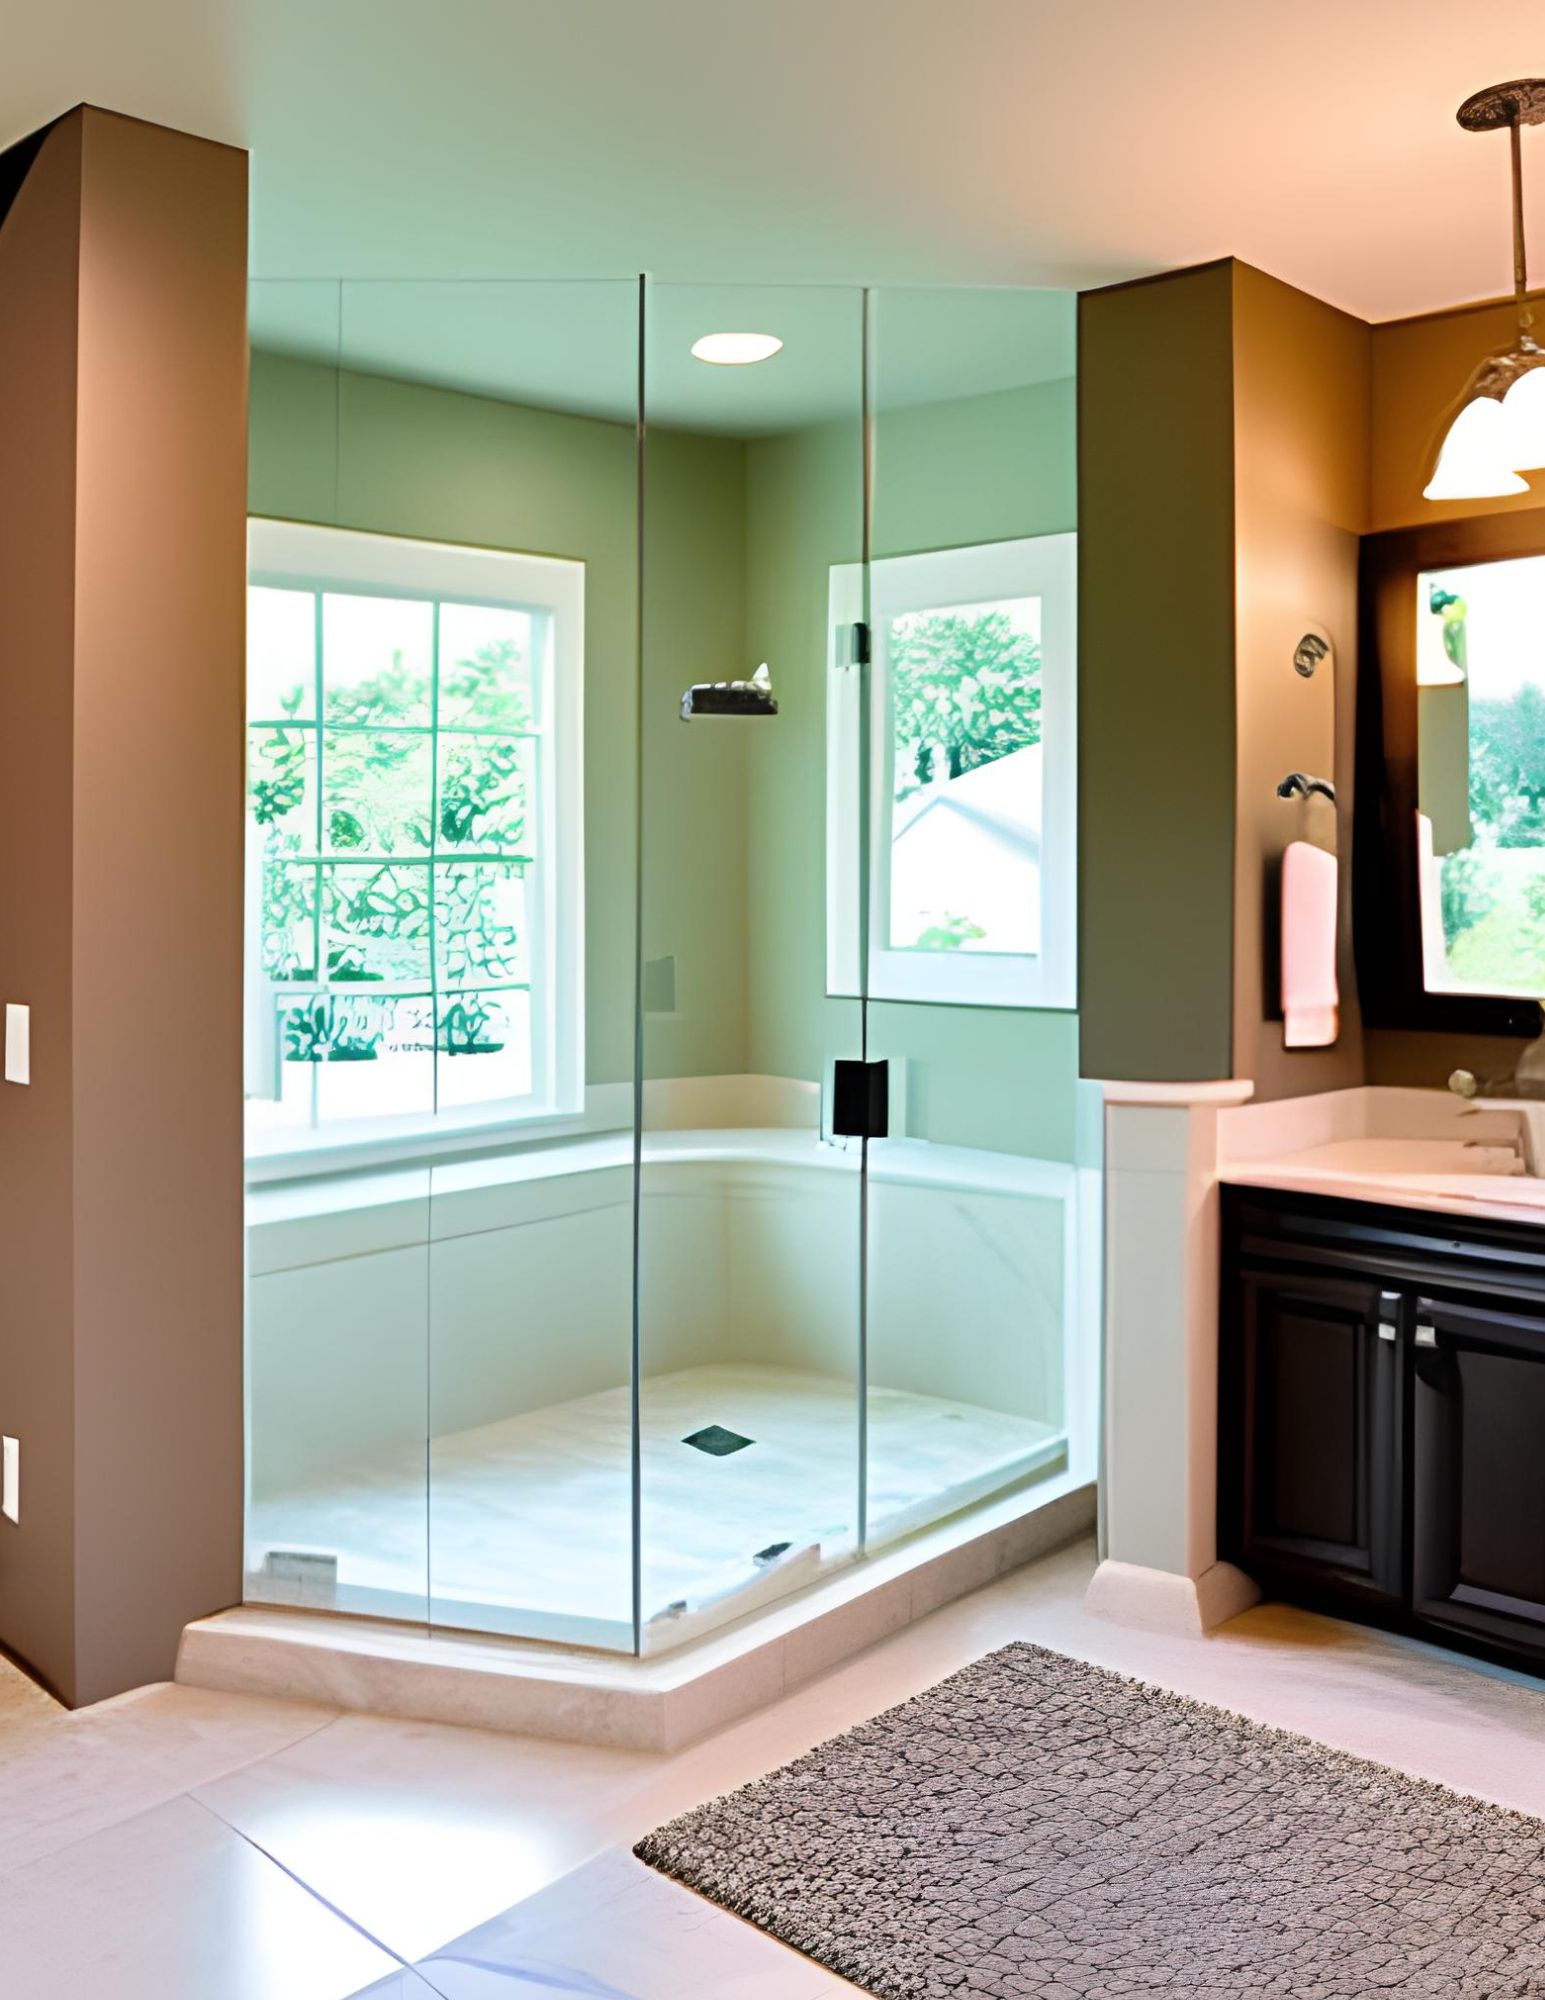 How To Get Started Remodeling Your Bathroom